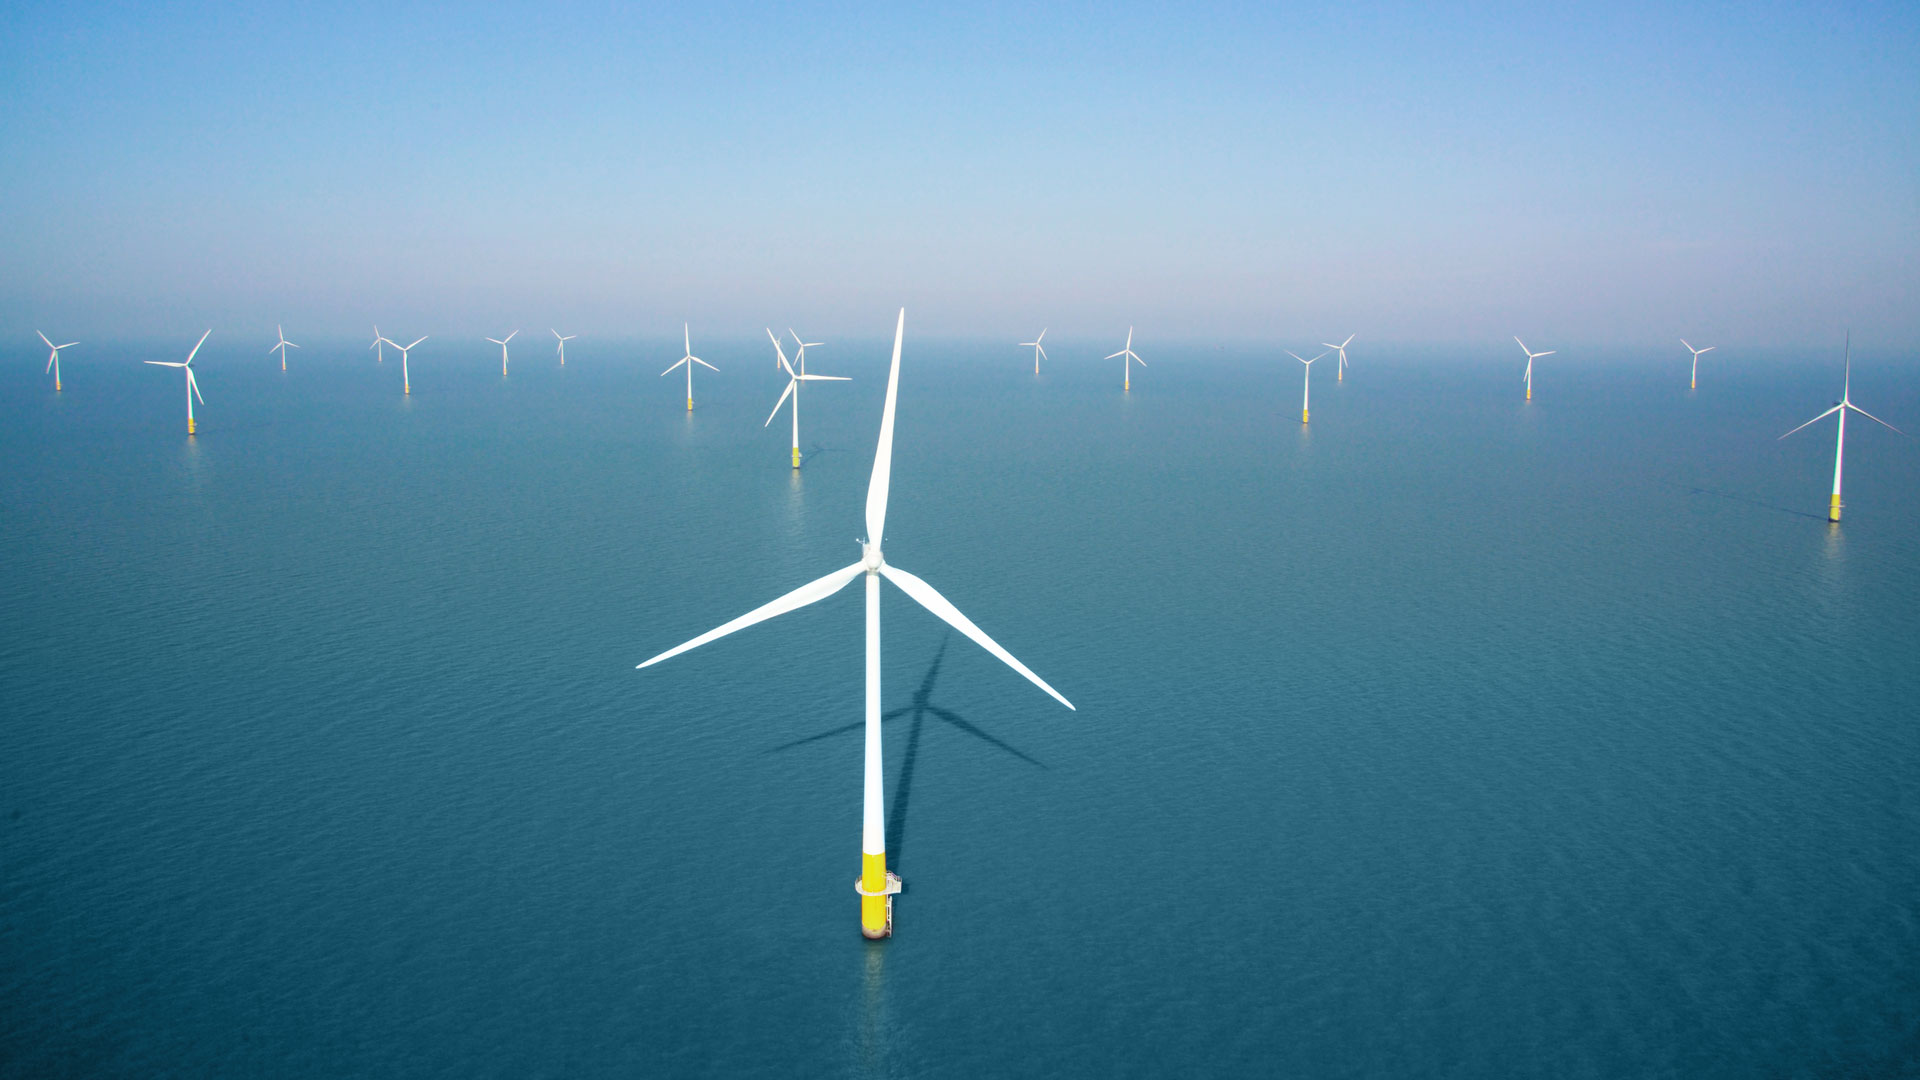 Image from Kentish flats offshore wind farm